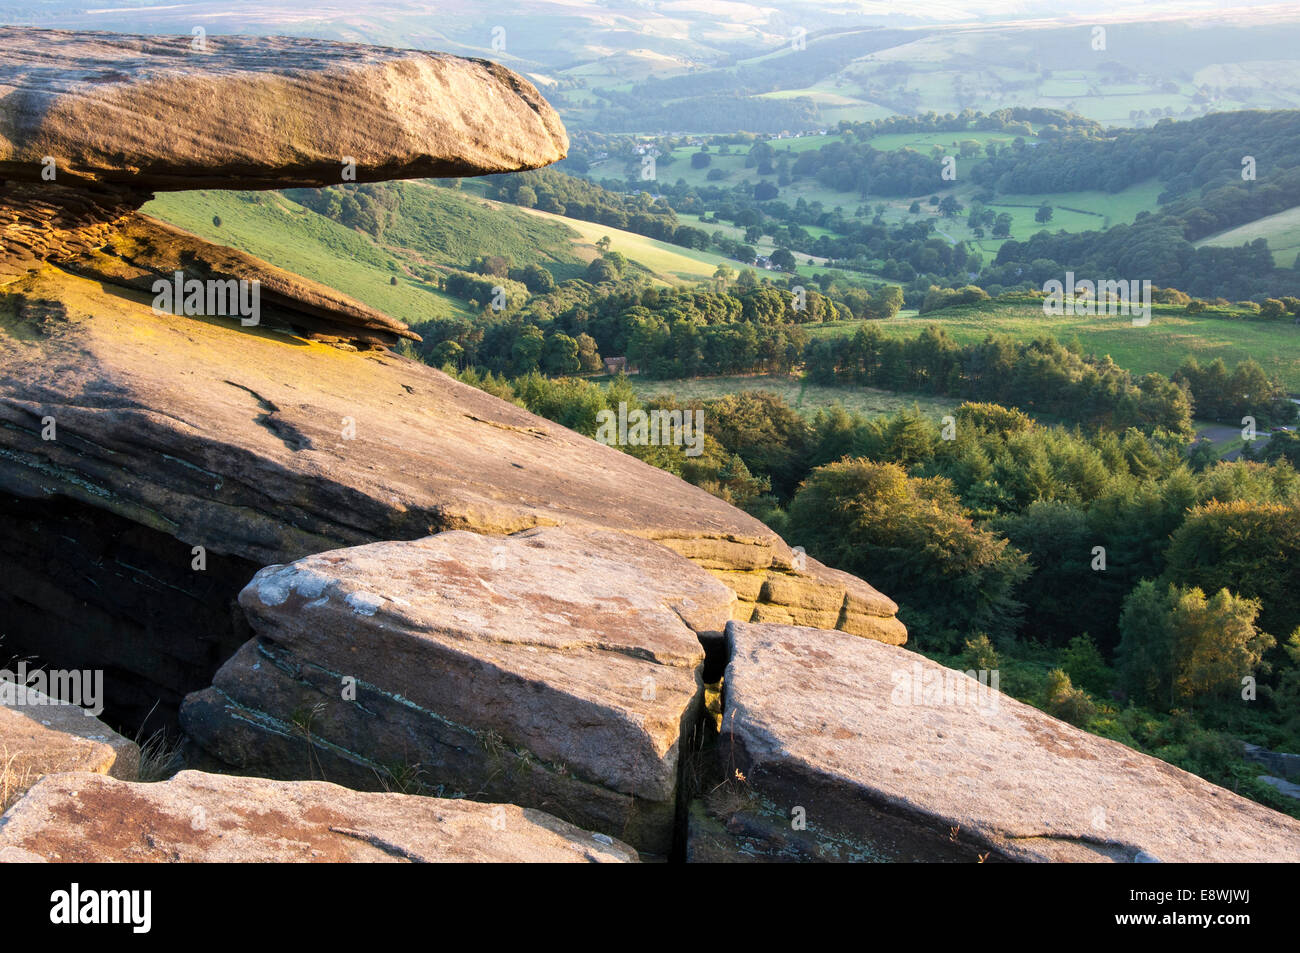 Gritstone rocks on Stanage edge, Peak District. View of Green landscape below. Stock Photo